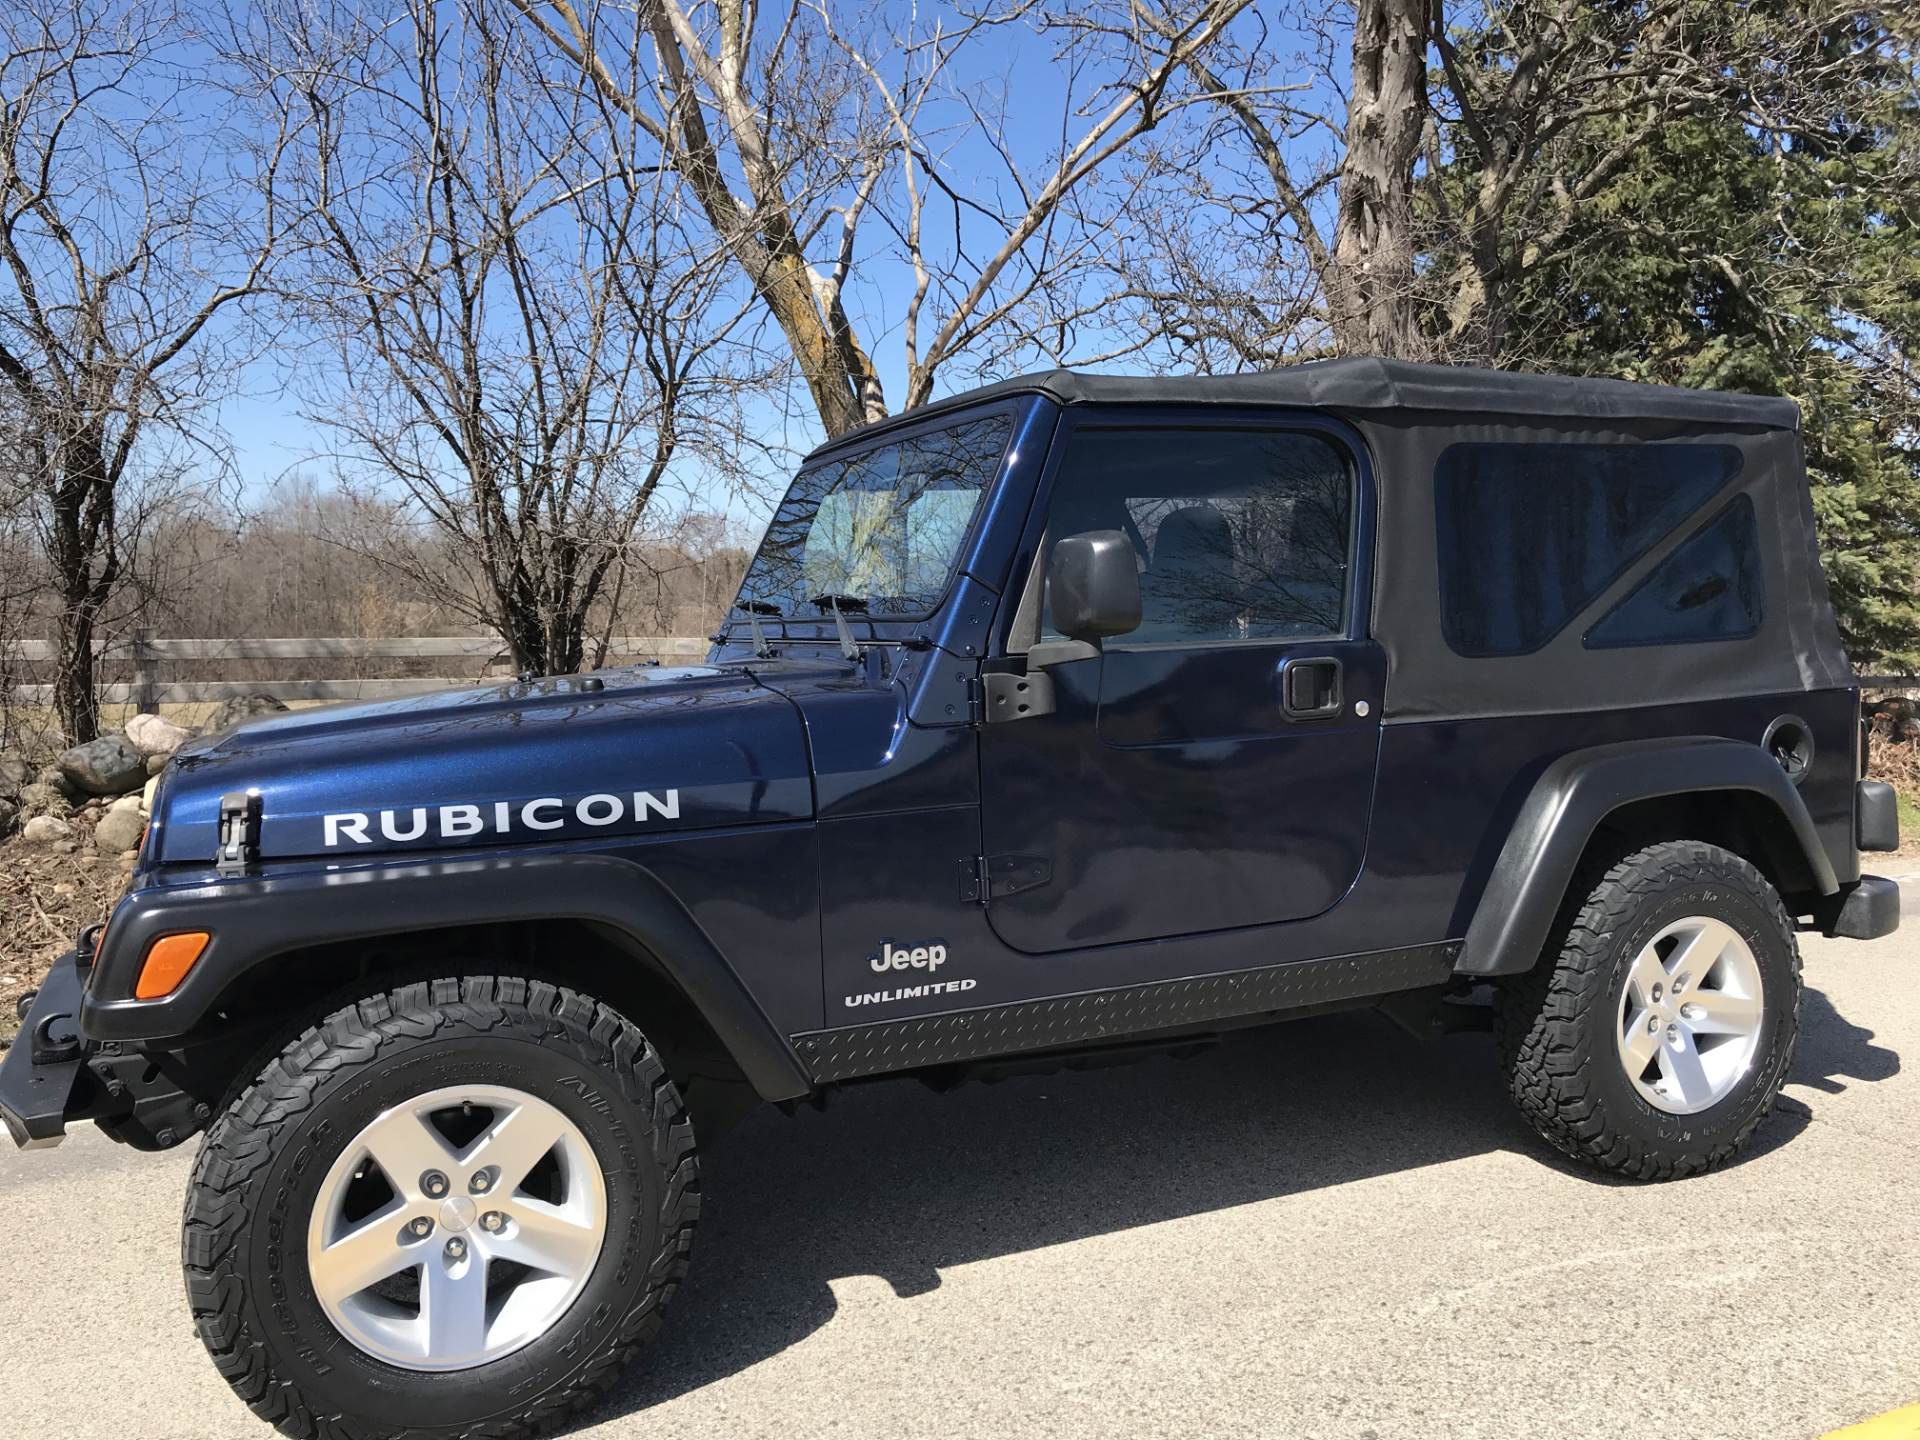 2006 Jeep Wrangler Unlimited Rubicon 2dr SUV 4WD in Big Bend, Wisconsin - Photo 3